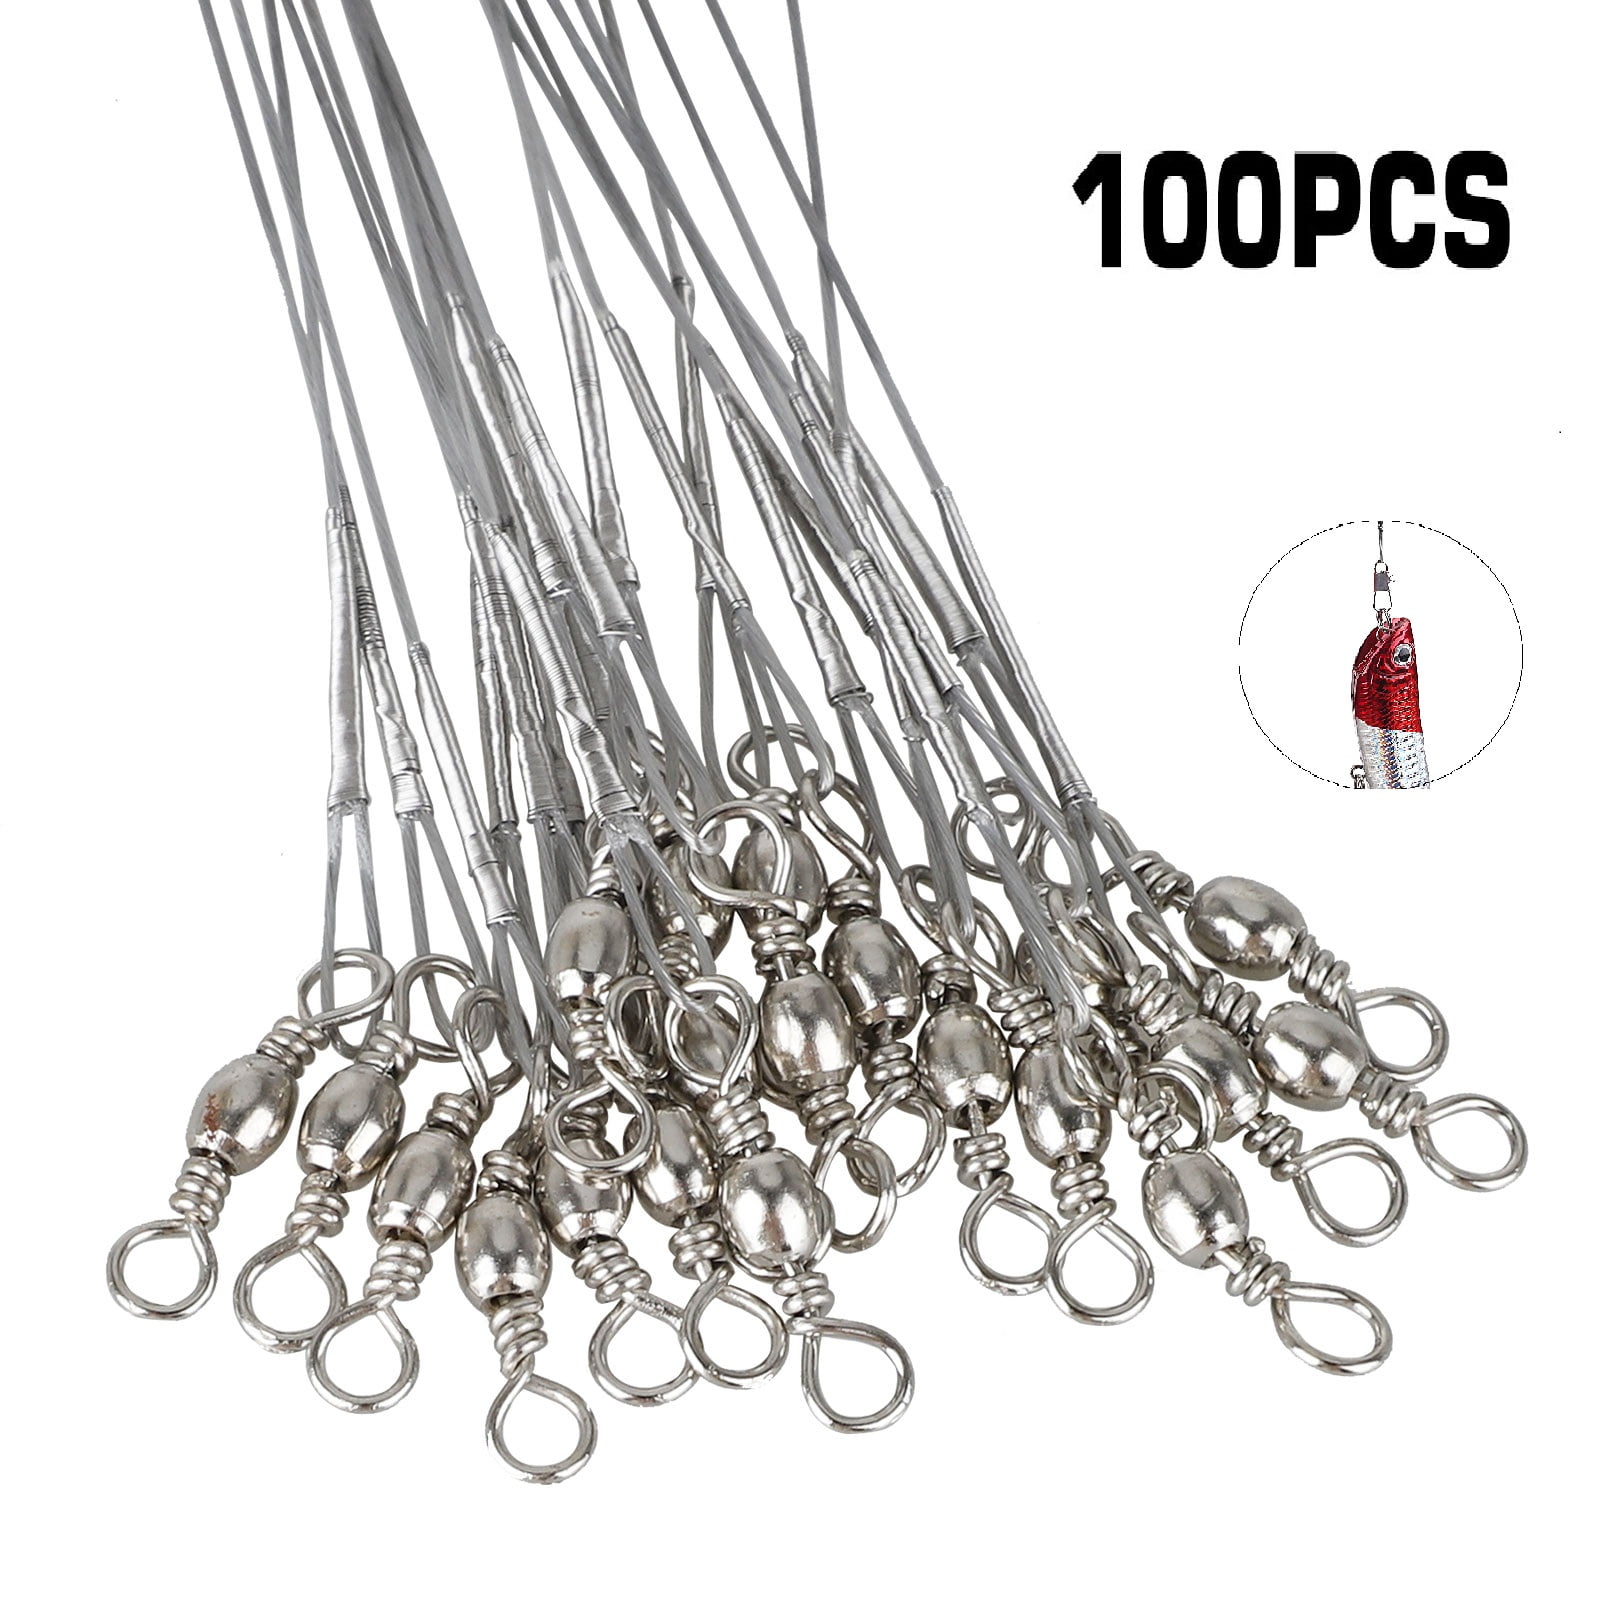 TSV 100PCS Stainless Steel Wire Fishing Leaders High-Strength